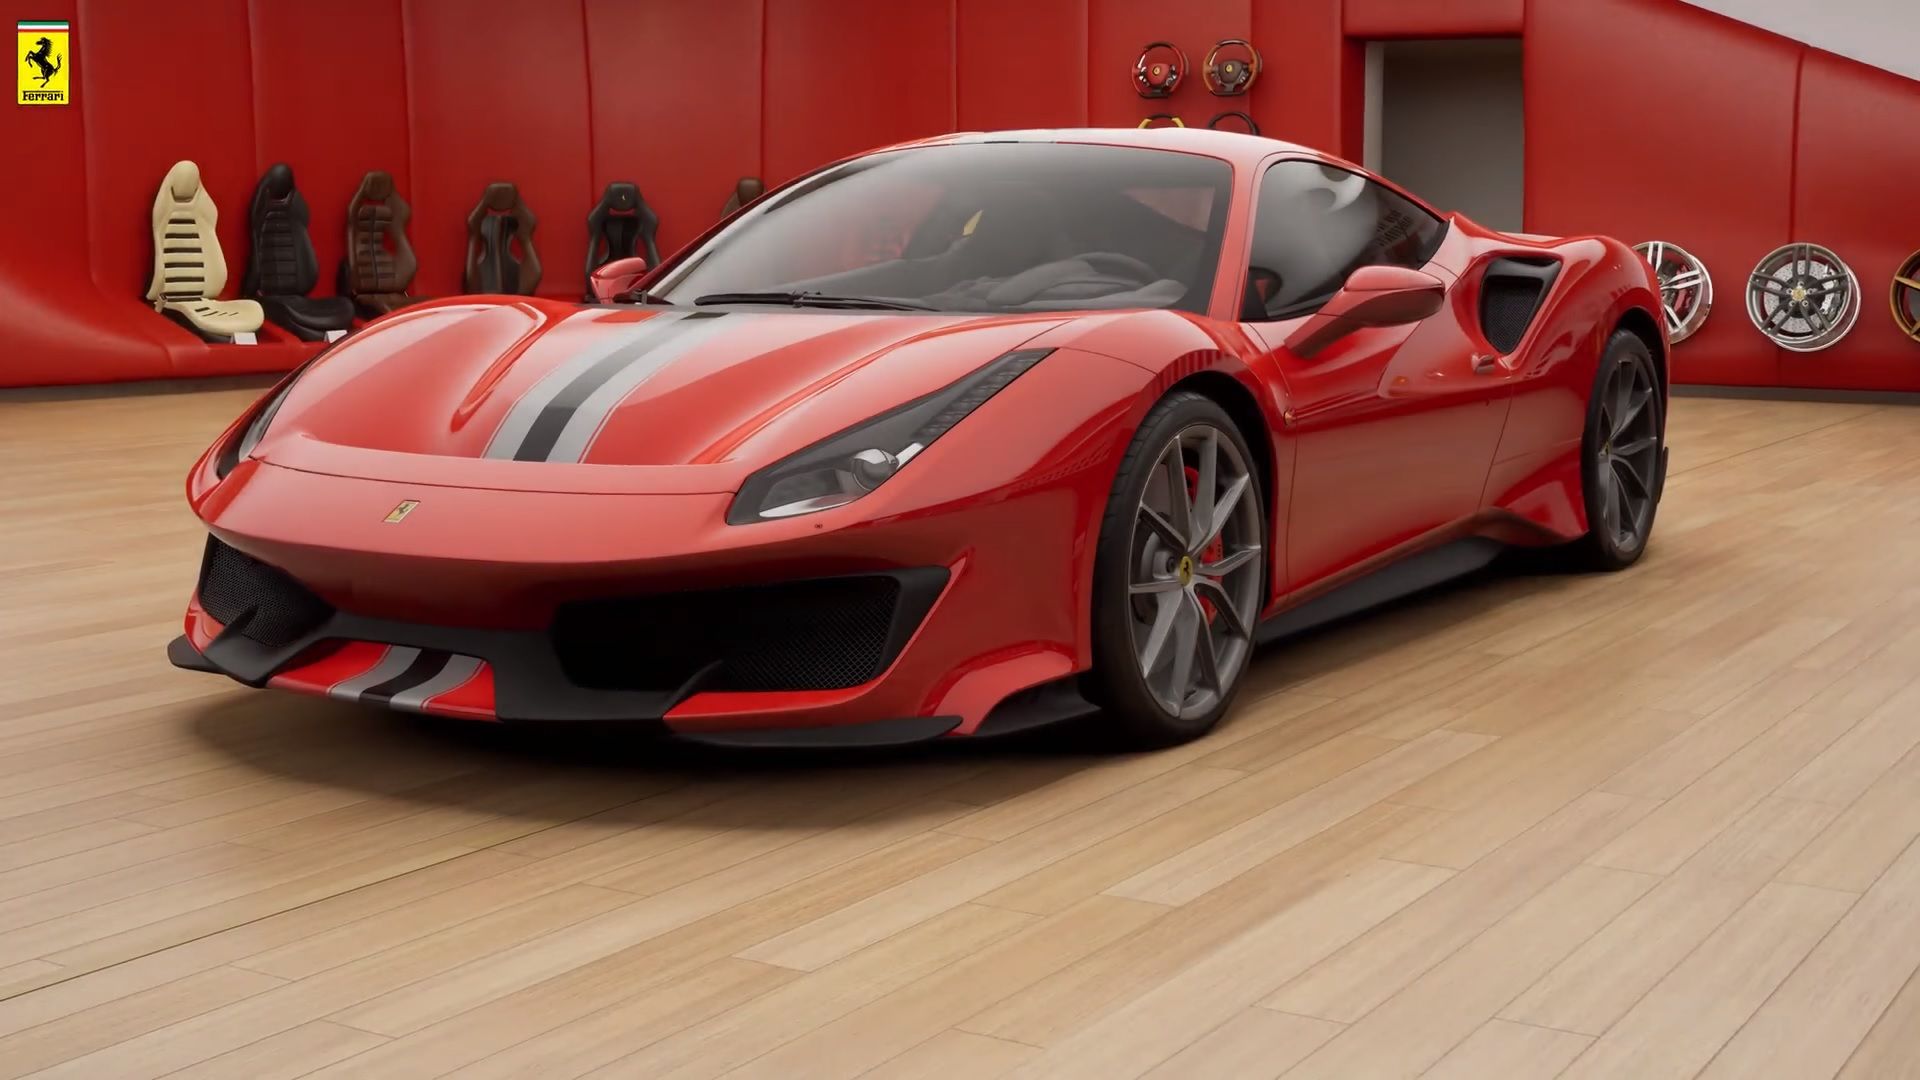 2020 - 2022 Butthurt Incoming: Ferrari Says Designing Cars for Women is a “Mistake”